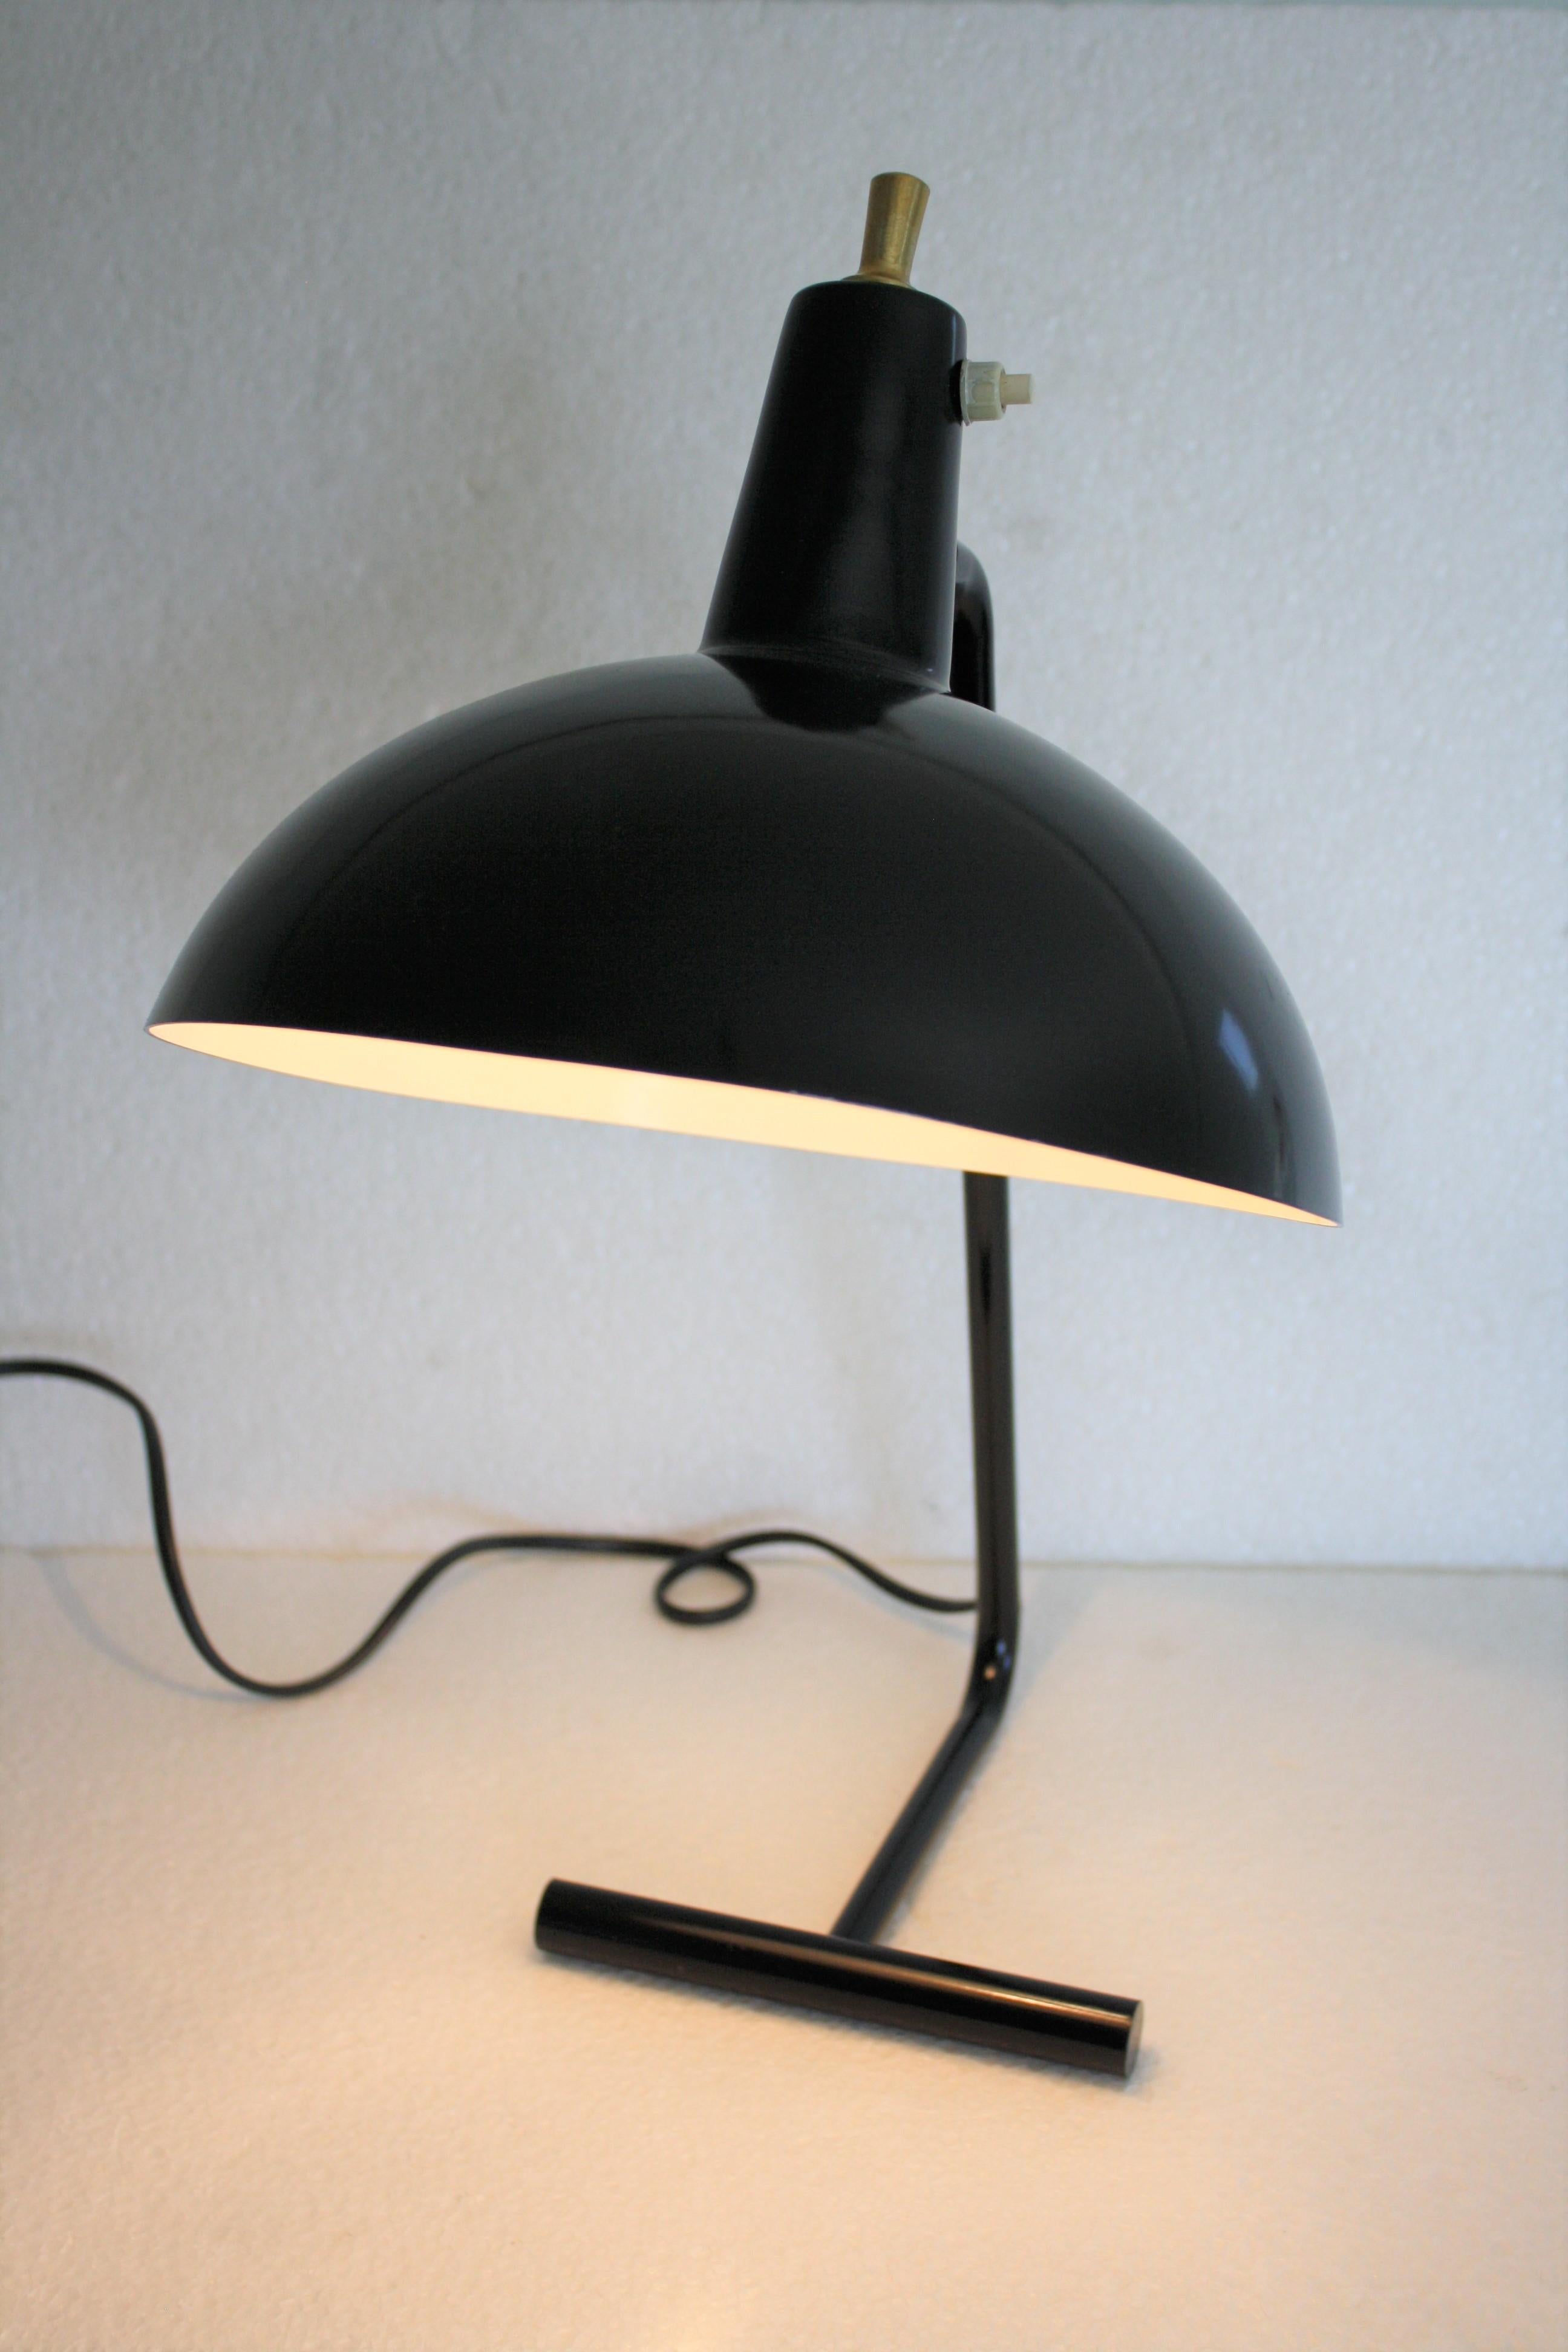 Beautifully restored black enamel desk lamp from the 1950s.

The lamp is designed by JJM Hoogervorst for Anvia, model 6019.

The shade is articulated.

The lamp has a wonderful modernist design.

1950s - Netherlands

Height: 45cm/17.5